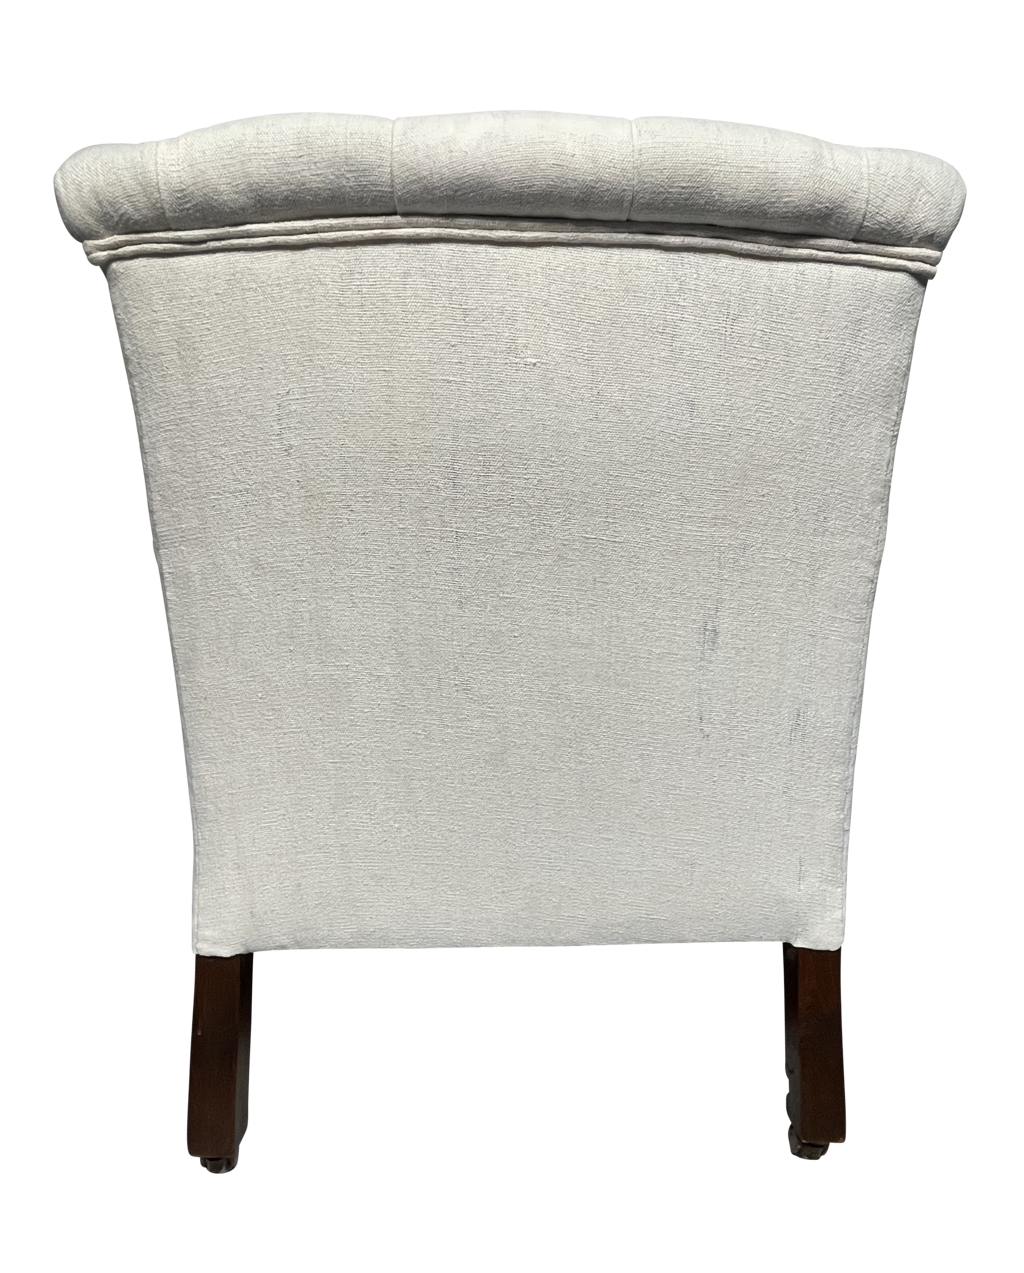 Victorian Armchair with Buttoned Scrolled Back and Sides Upholstered in Antique French Hemp Linen